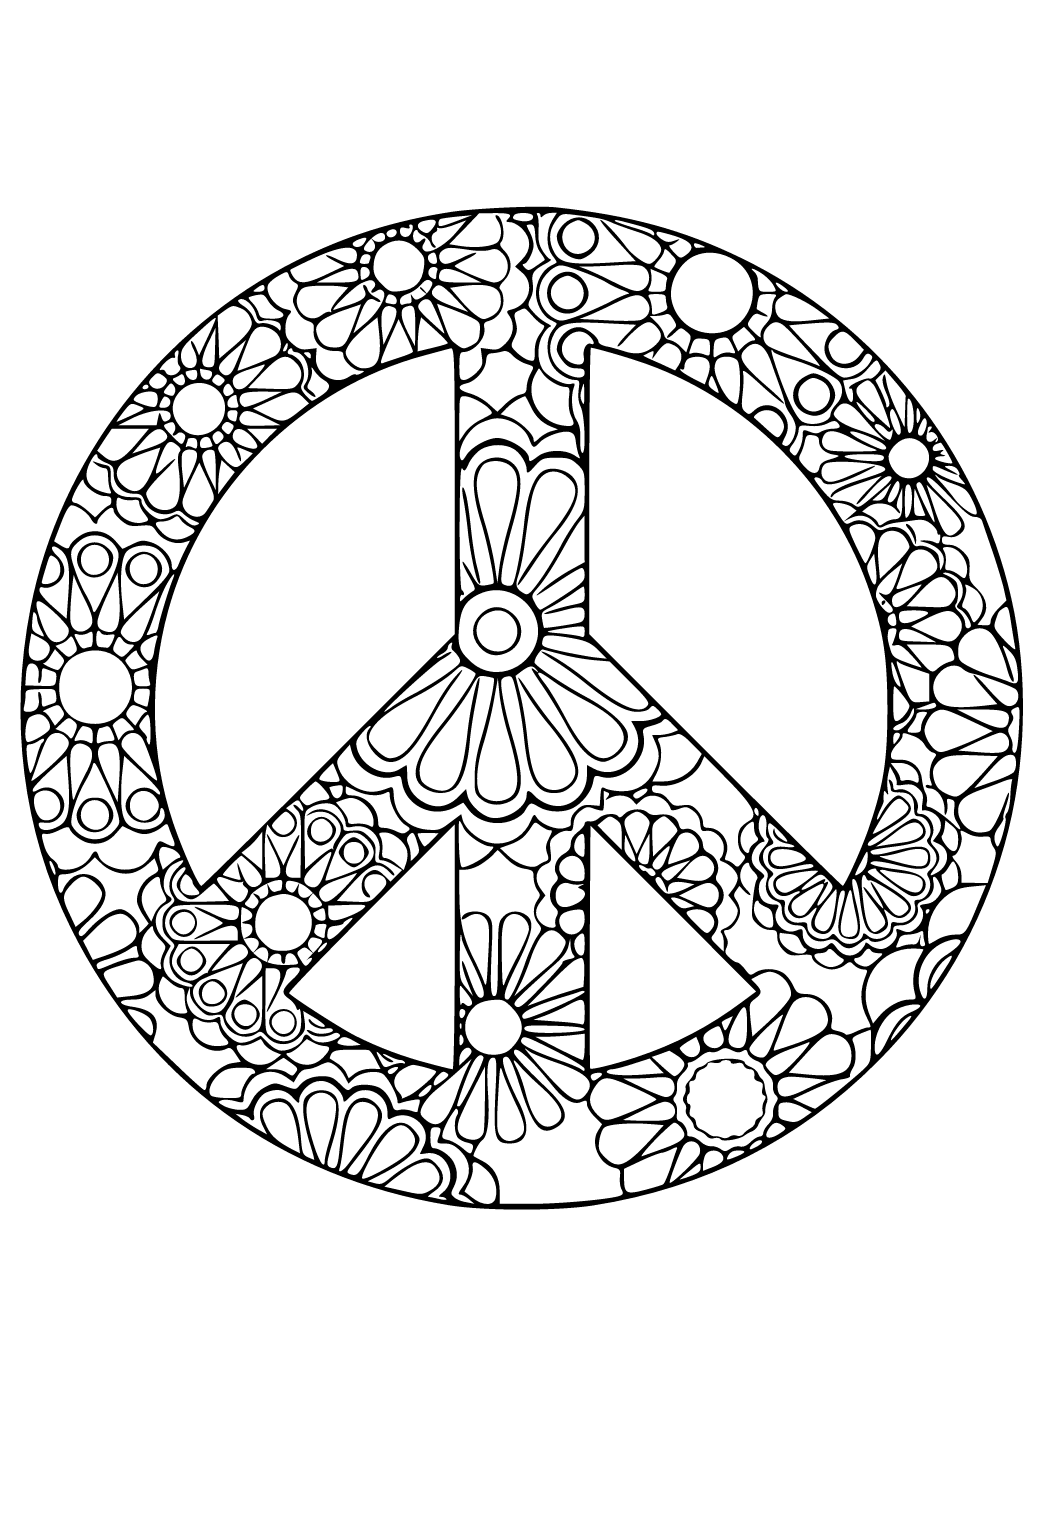 Free Printable Peace Sign Background Coloring Page for Adults and Kids ...